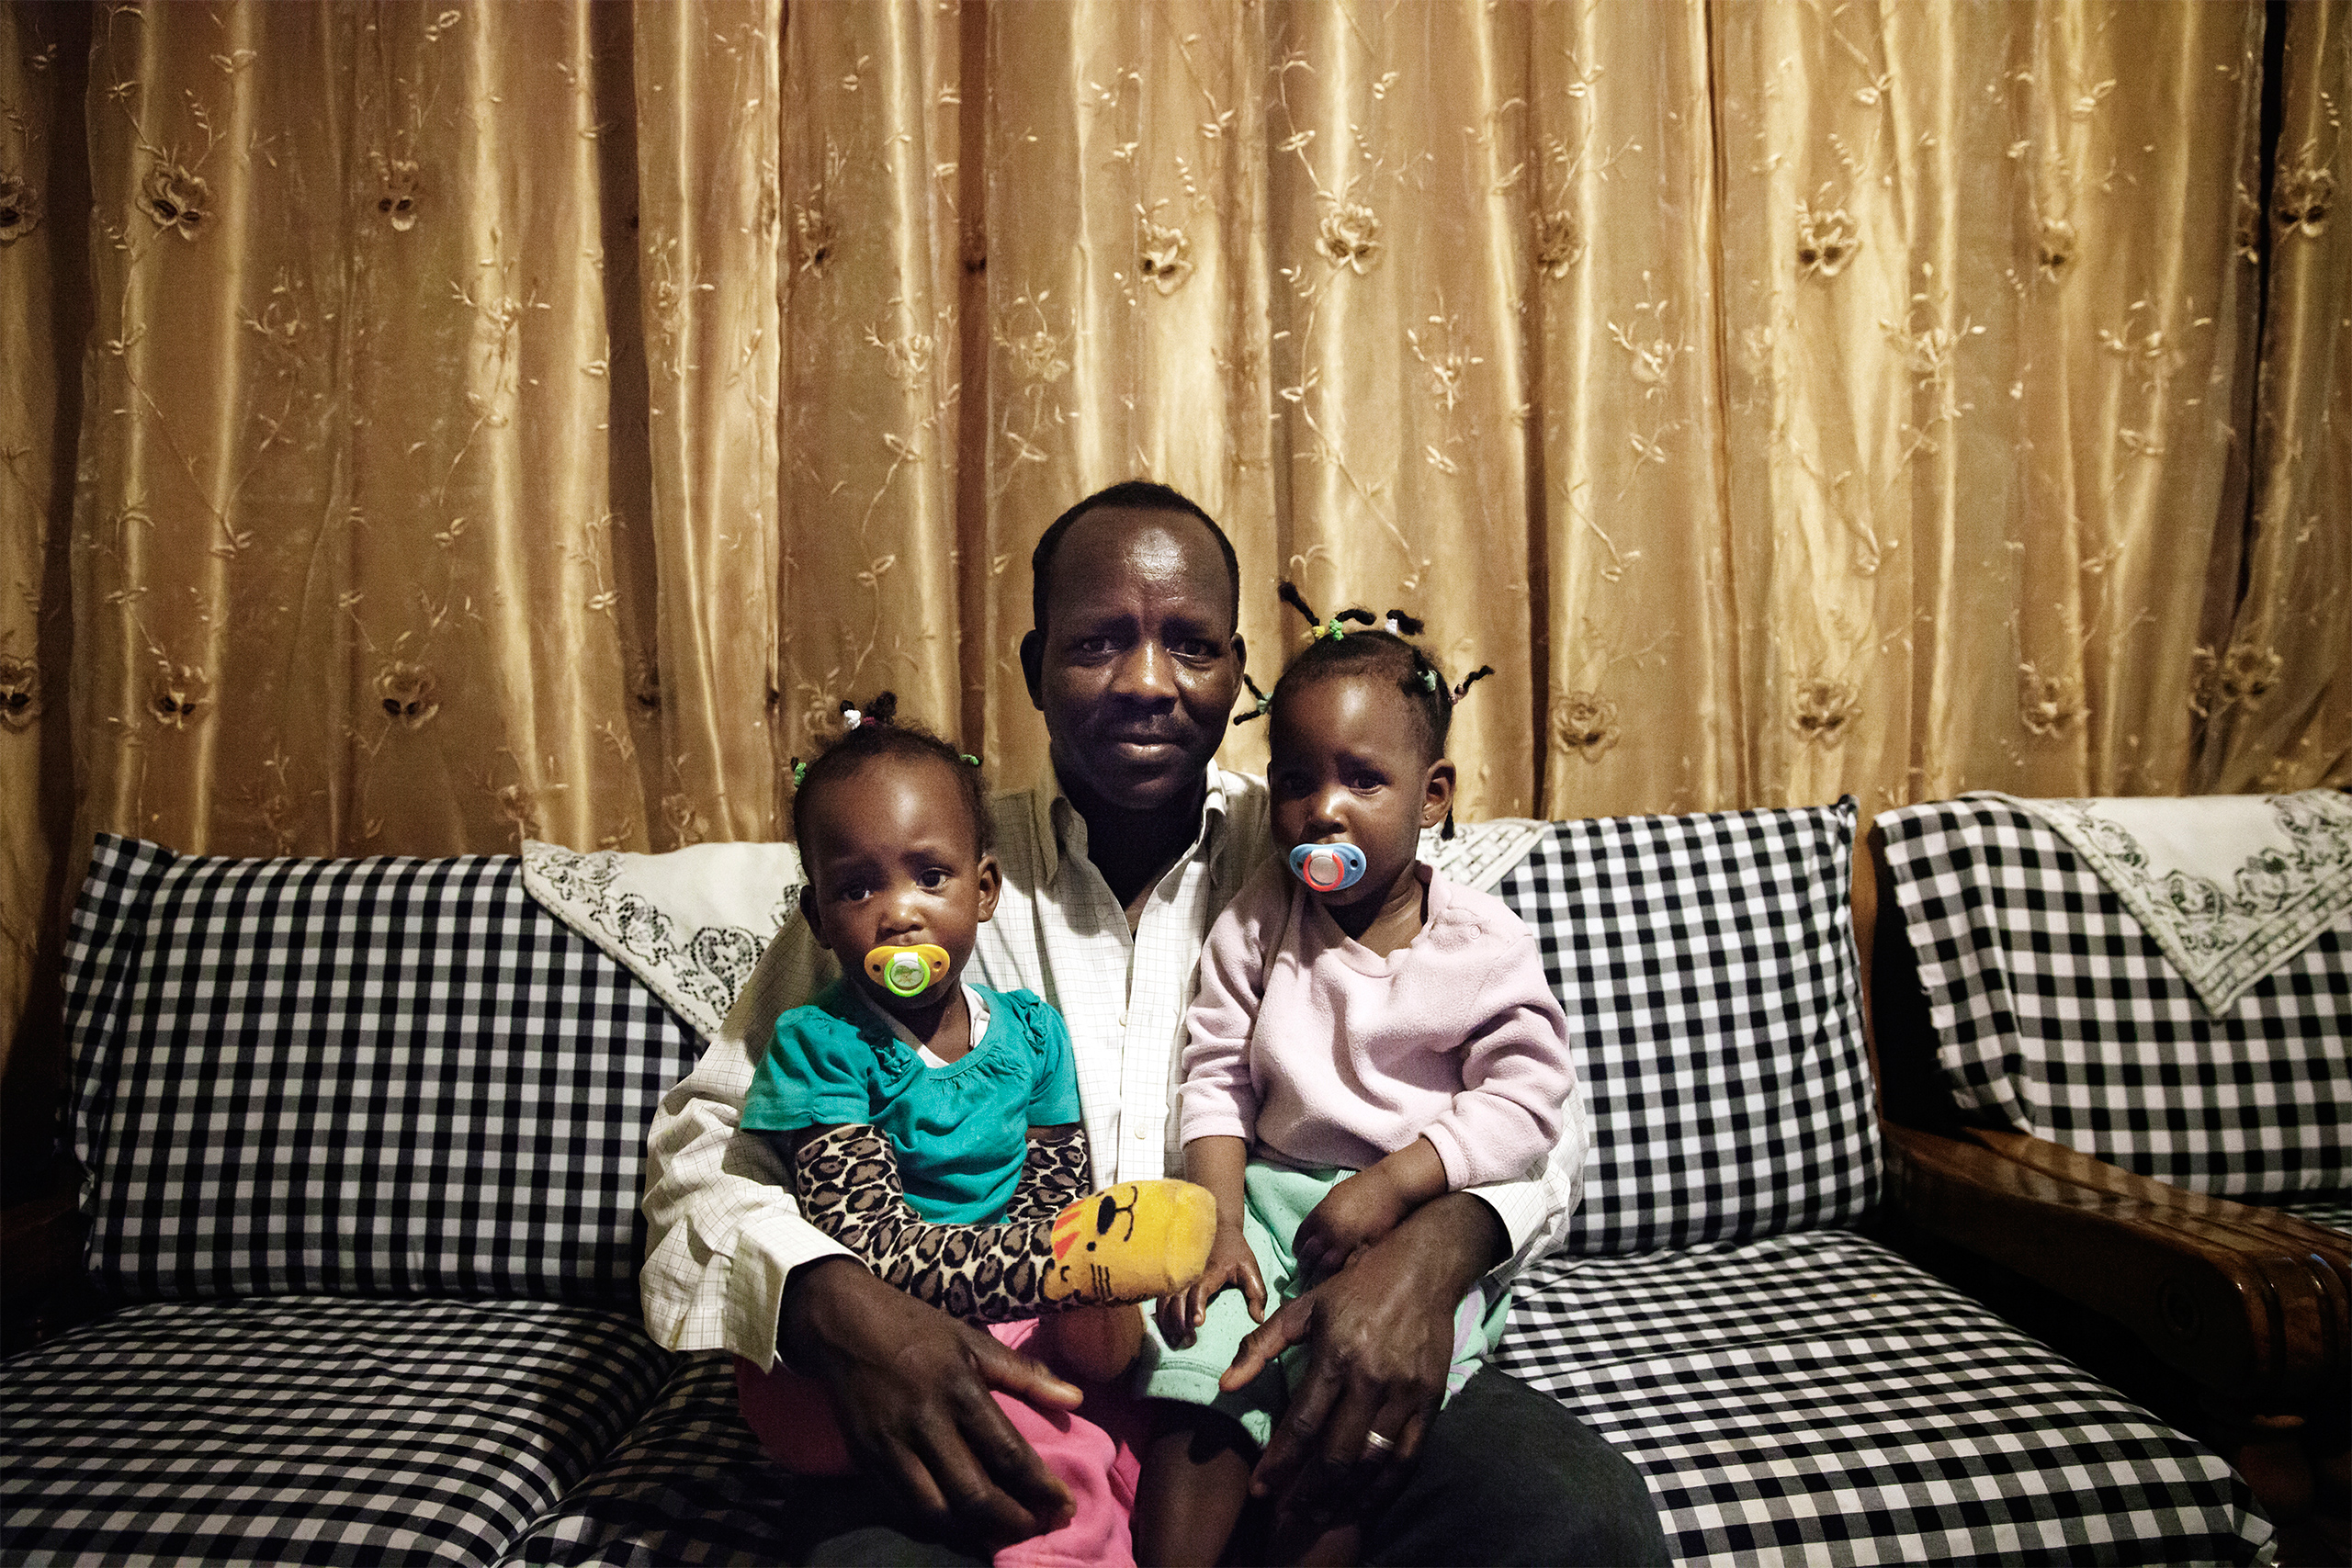 Boshora Adam, an African refugee, appears with his twin daughters in their home in Tel Aviv, Israel.  “The hardest part about raising my children in Israel is that it’s becoming more segregated," he says. "On the playground you notice that parents keep their children away from African children, and this worries me for my children’s future.” (Malin Fezehai)